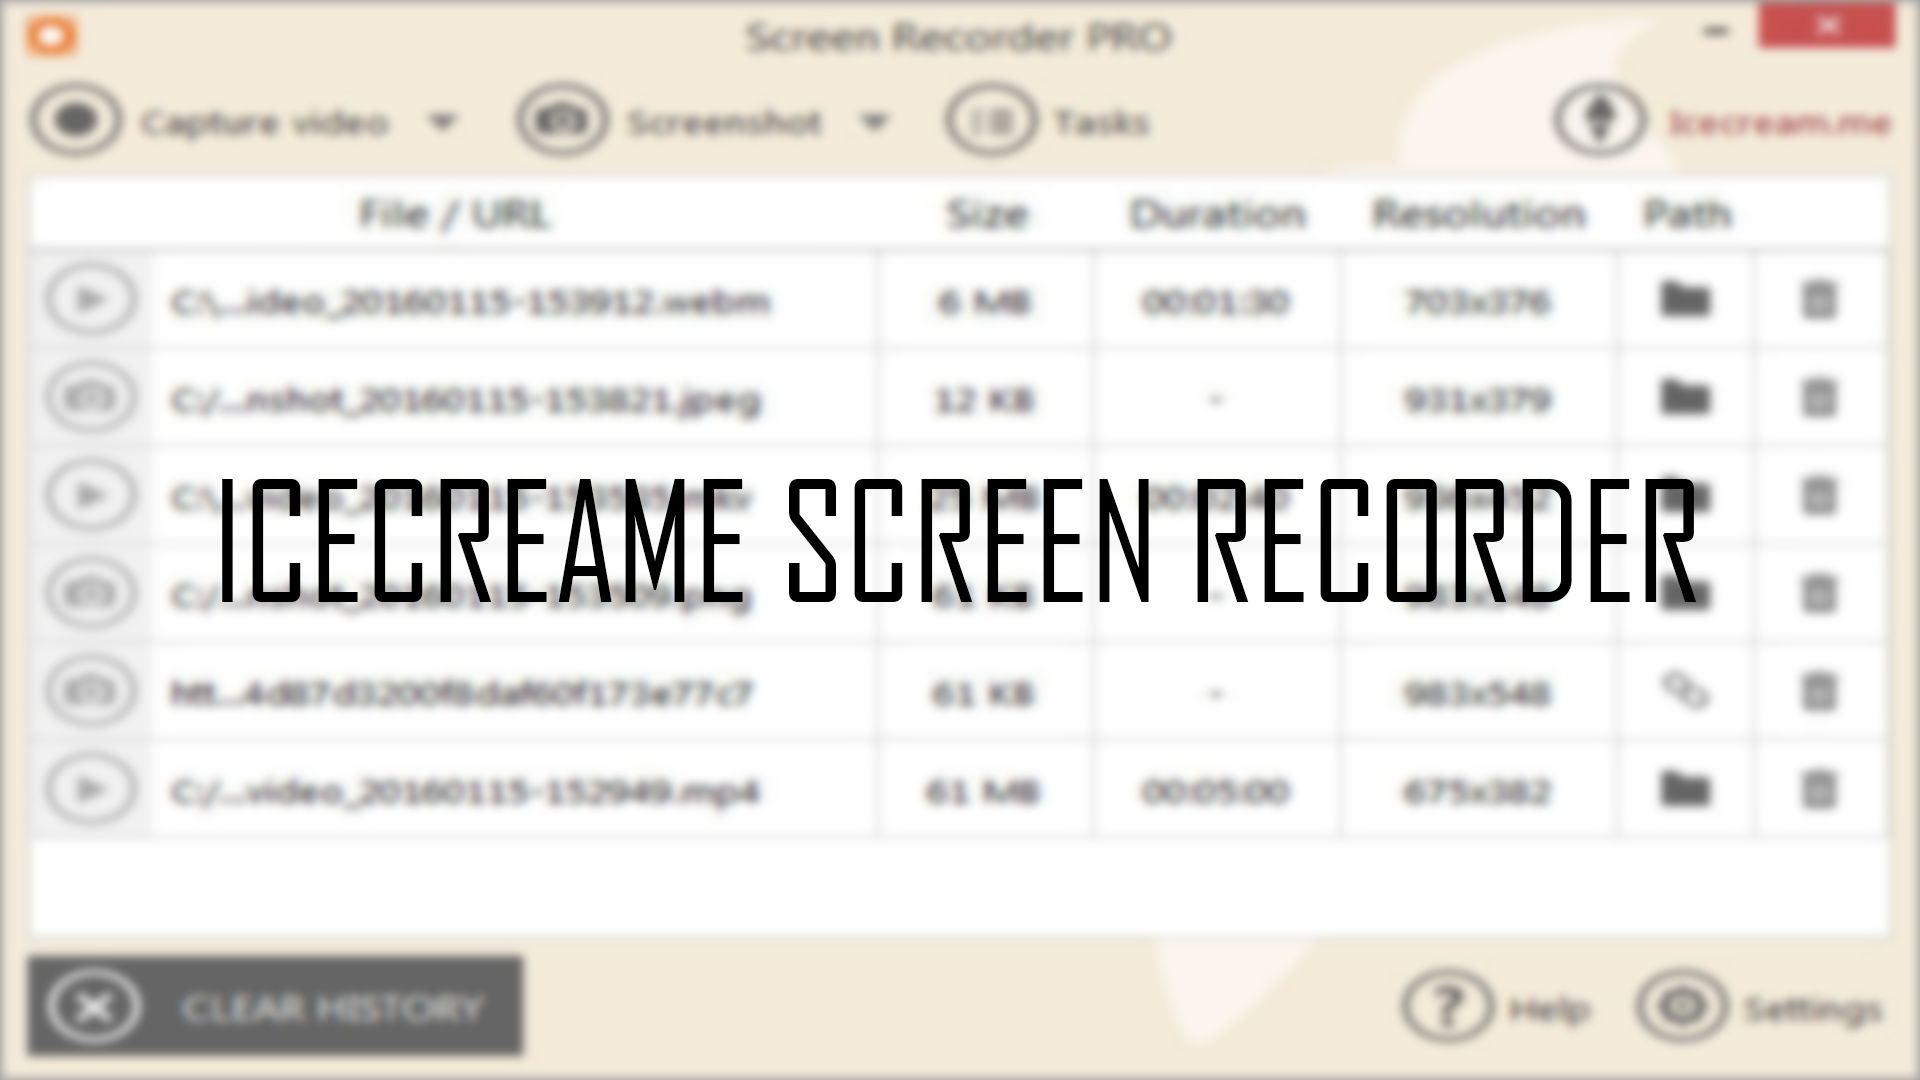 screen recorder for windows 8 free download full version